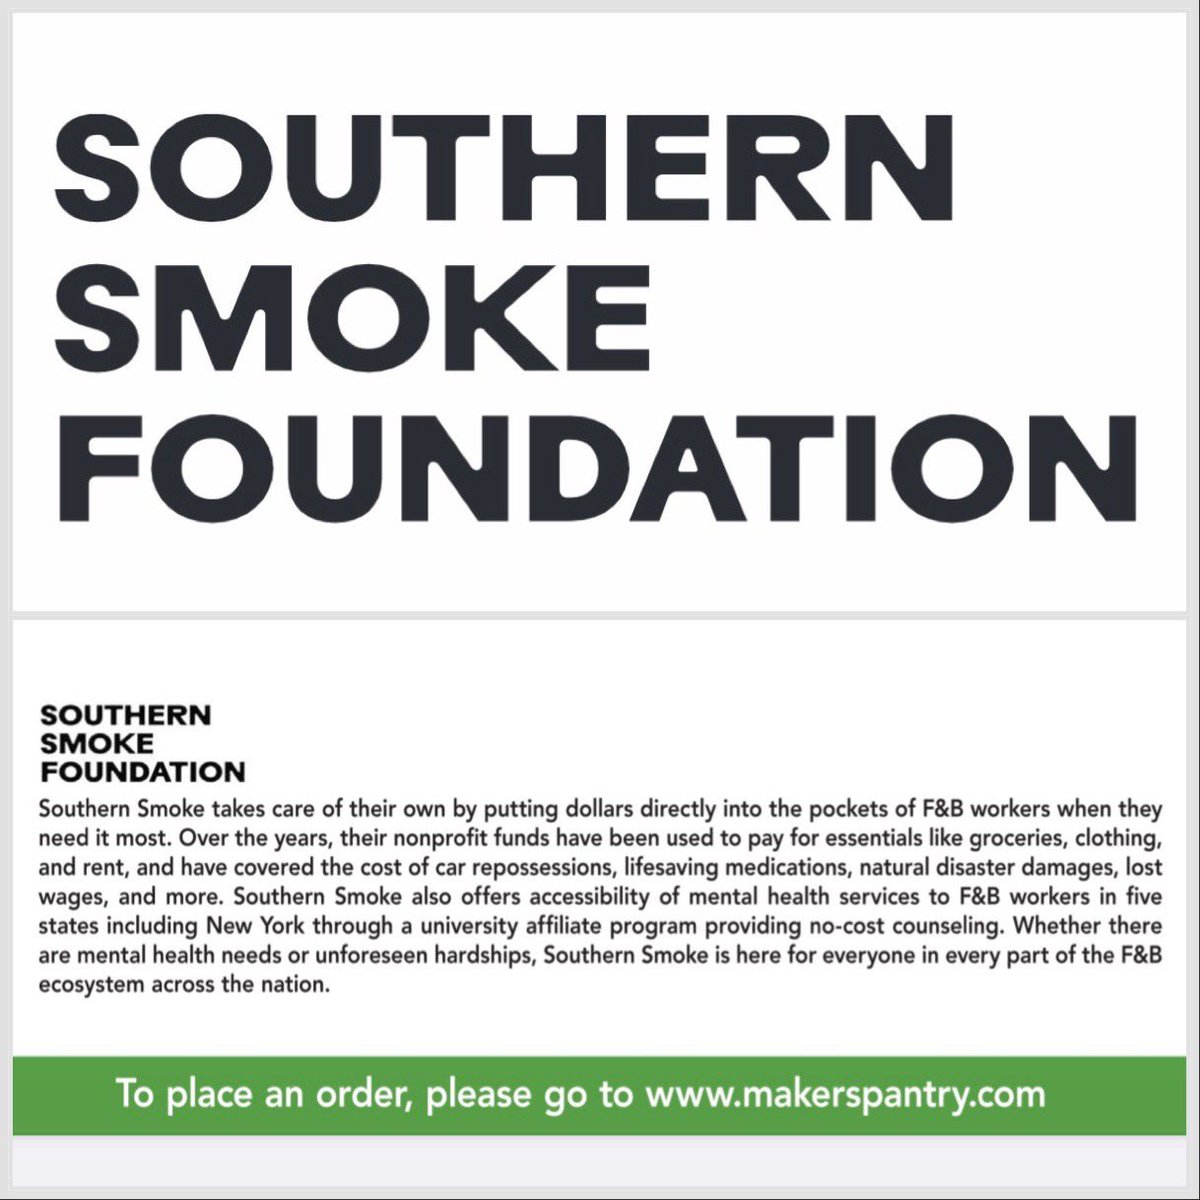 Our 2023 Holiday Gift Box is On Sale! 5% of sales proceeds are being donated to @southernsmokefoundation to help F&B workers.

makerspantry.com

#makerspantry #foodgifts #culinarygifts #giftbaskets #tastygifts #culinarylife #bakers #nycgifts #giftboxes #eterrakitchen